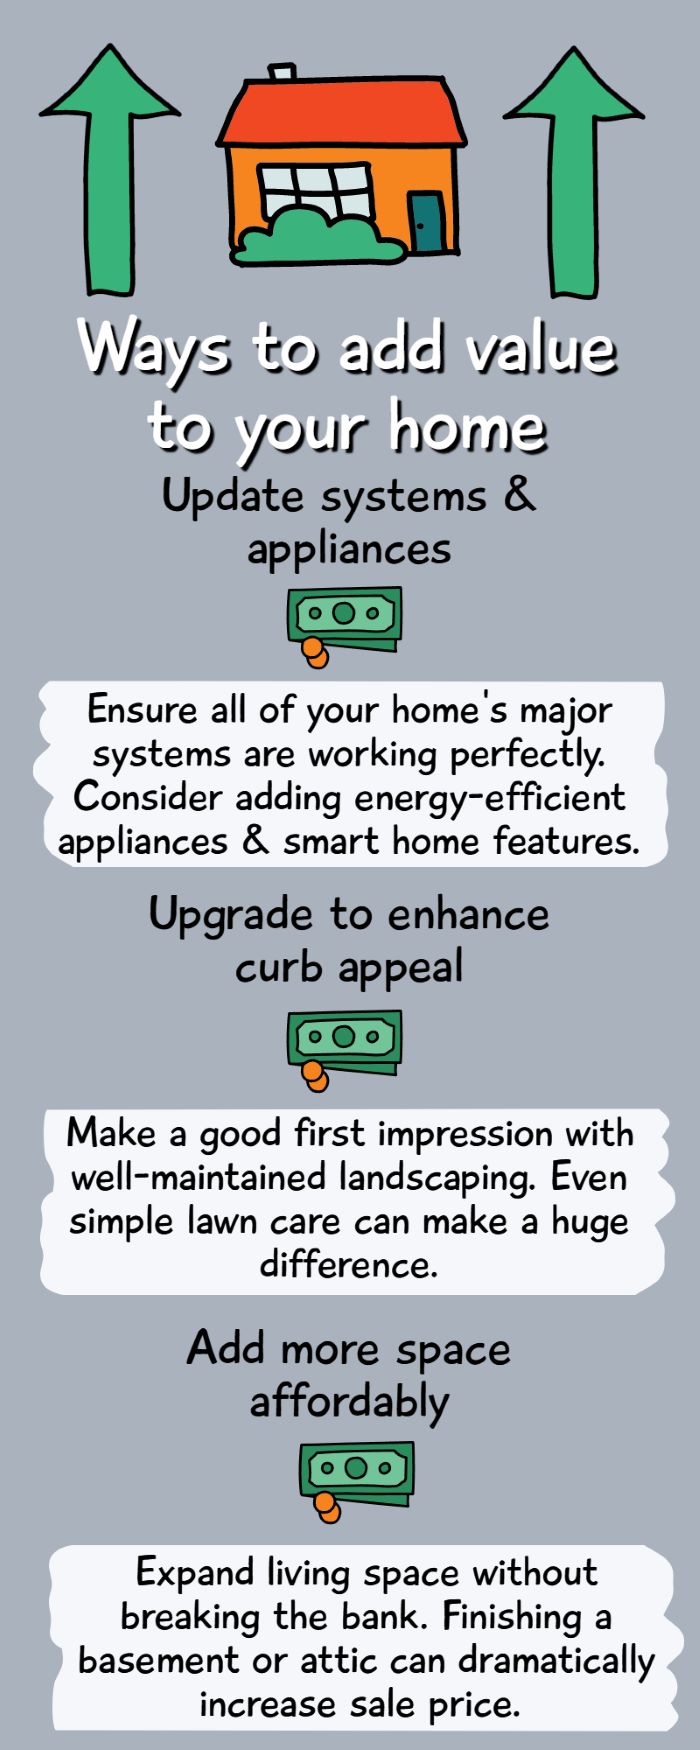 How to add value to your home infographic